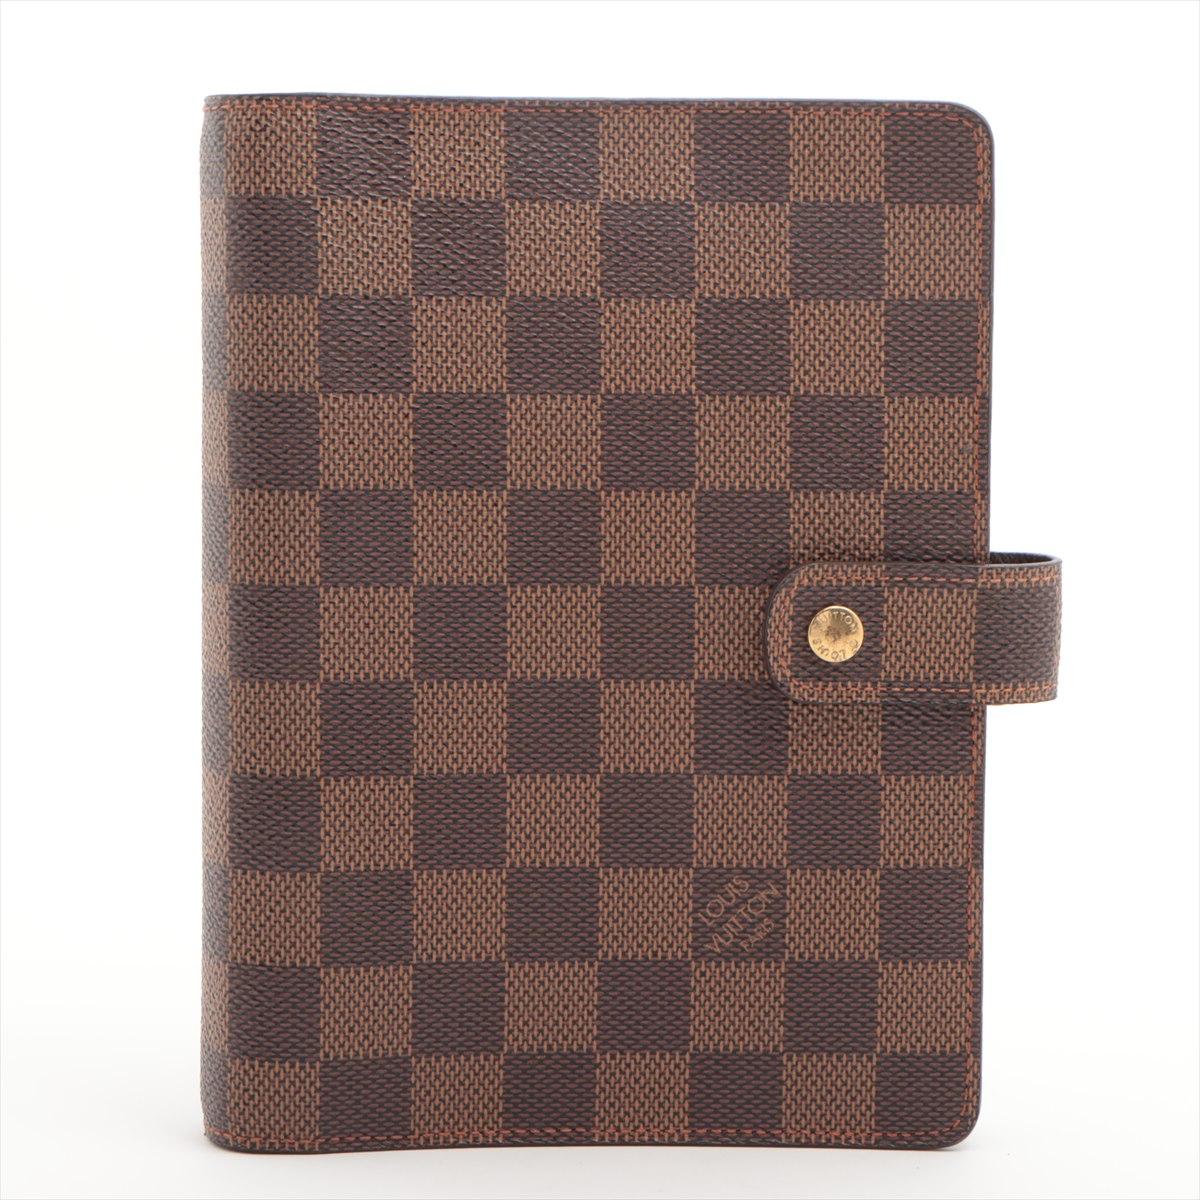 The Louis Vuitton Damier Ebene Agenda Notebook Cover is a sophisticated and versatile accessory for those who appreciate both style and organization. Crafted with the iconic Damier canvas, the notebook cover showcases the timeless elegance and